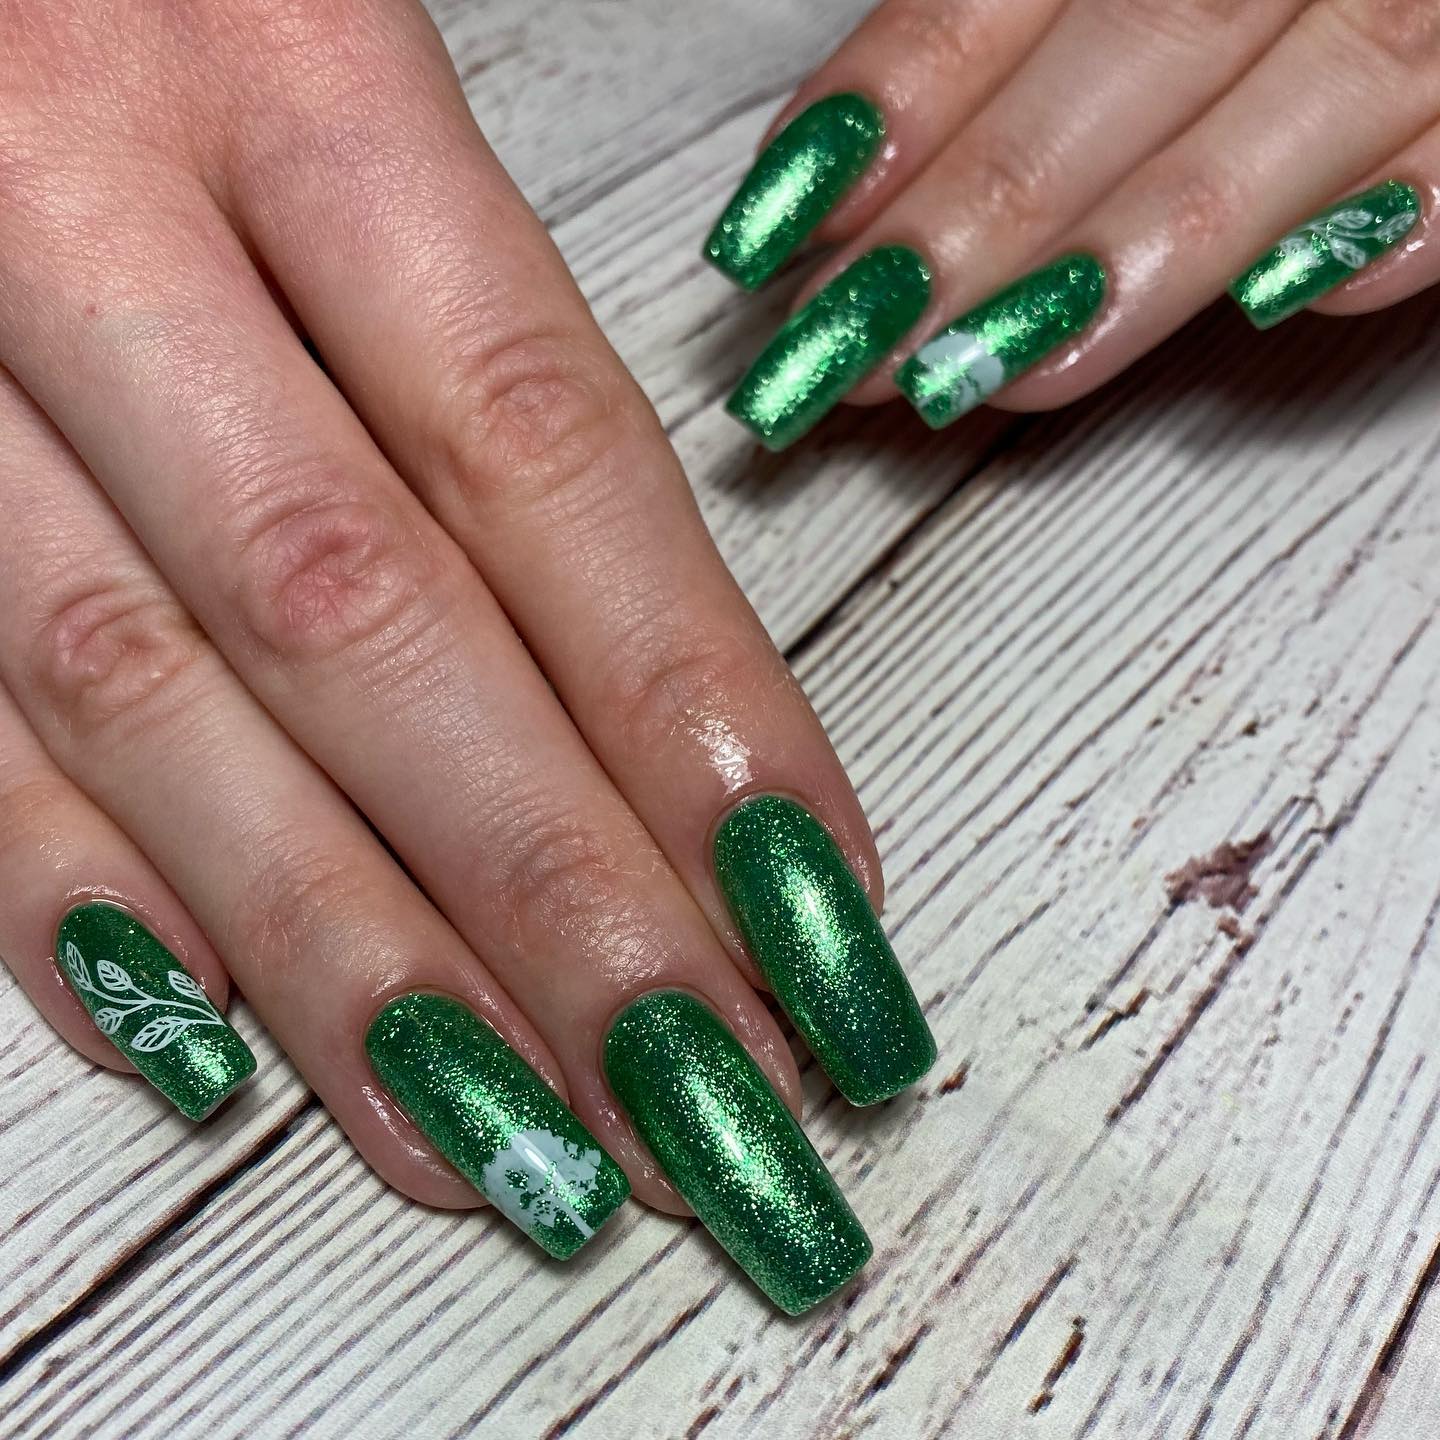 Here is a great idea for parties. You can shine up the night with your dark green glittered nails.